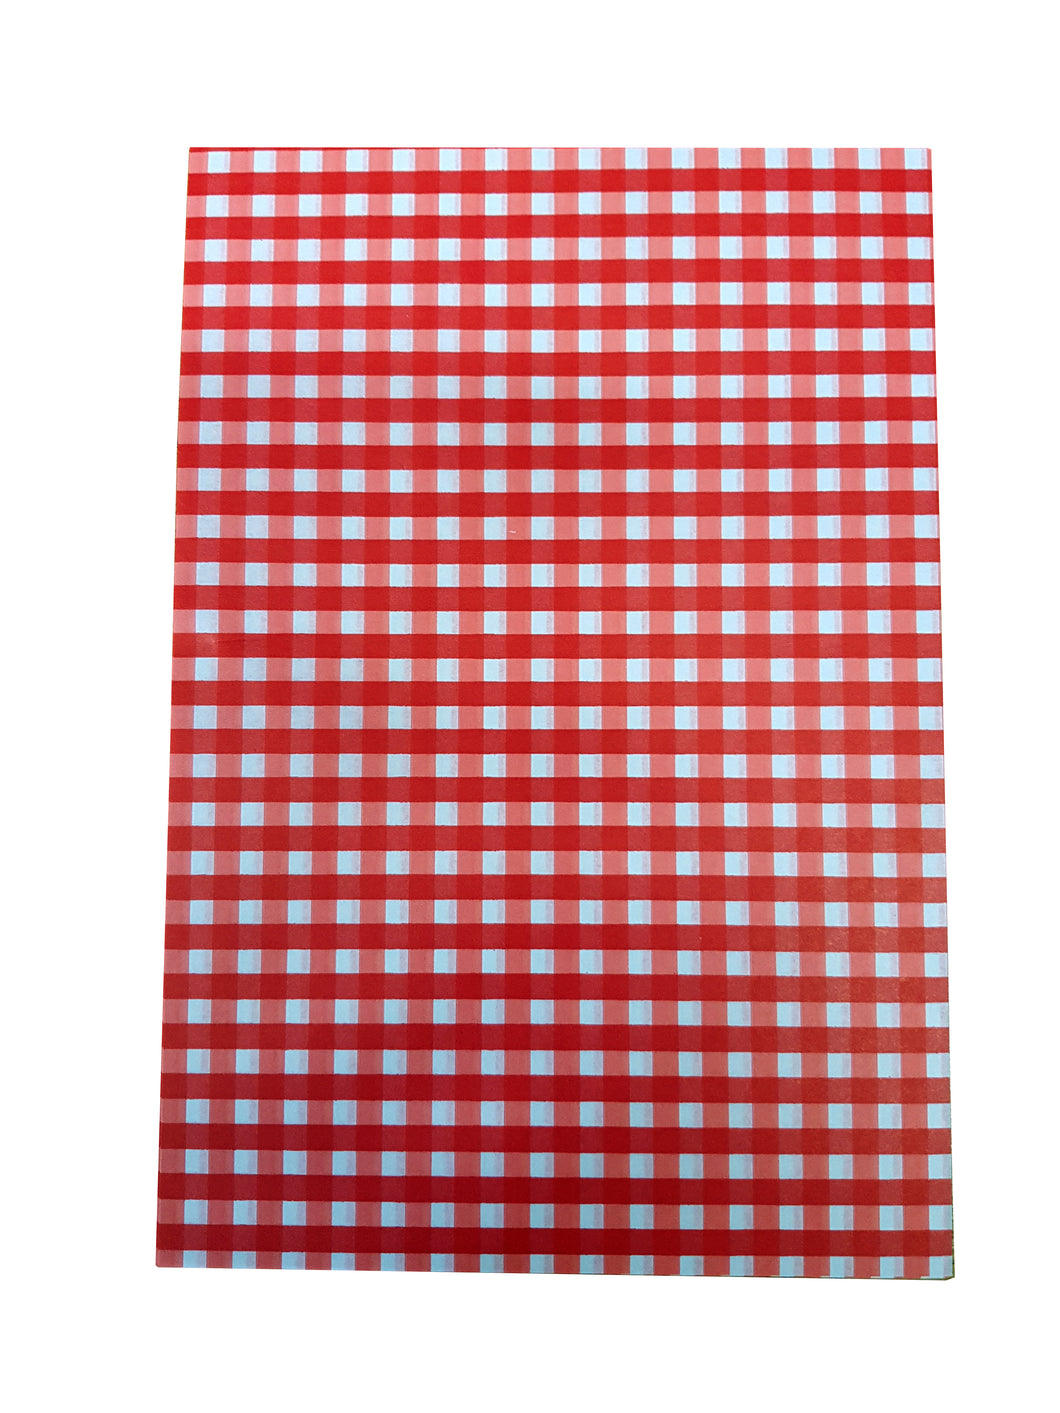 Red Gingham Greaseproof Sheets, Chip & Tray Liners. packs of 1,000